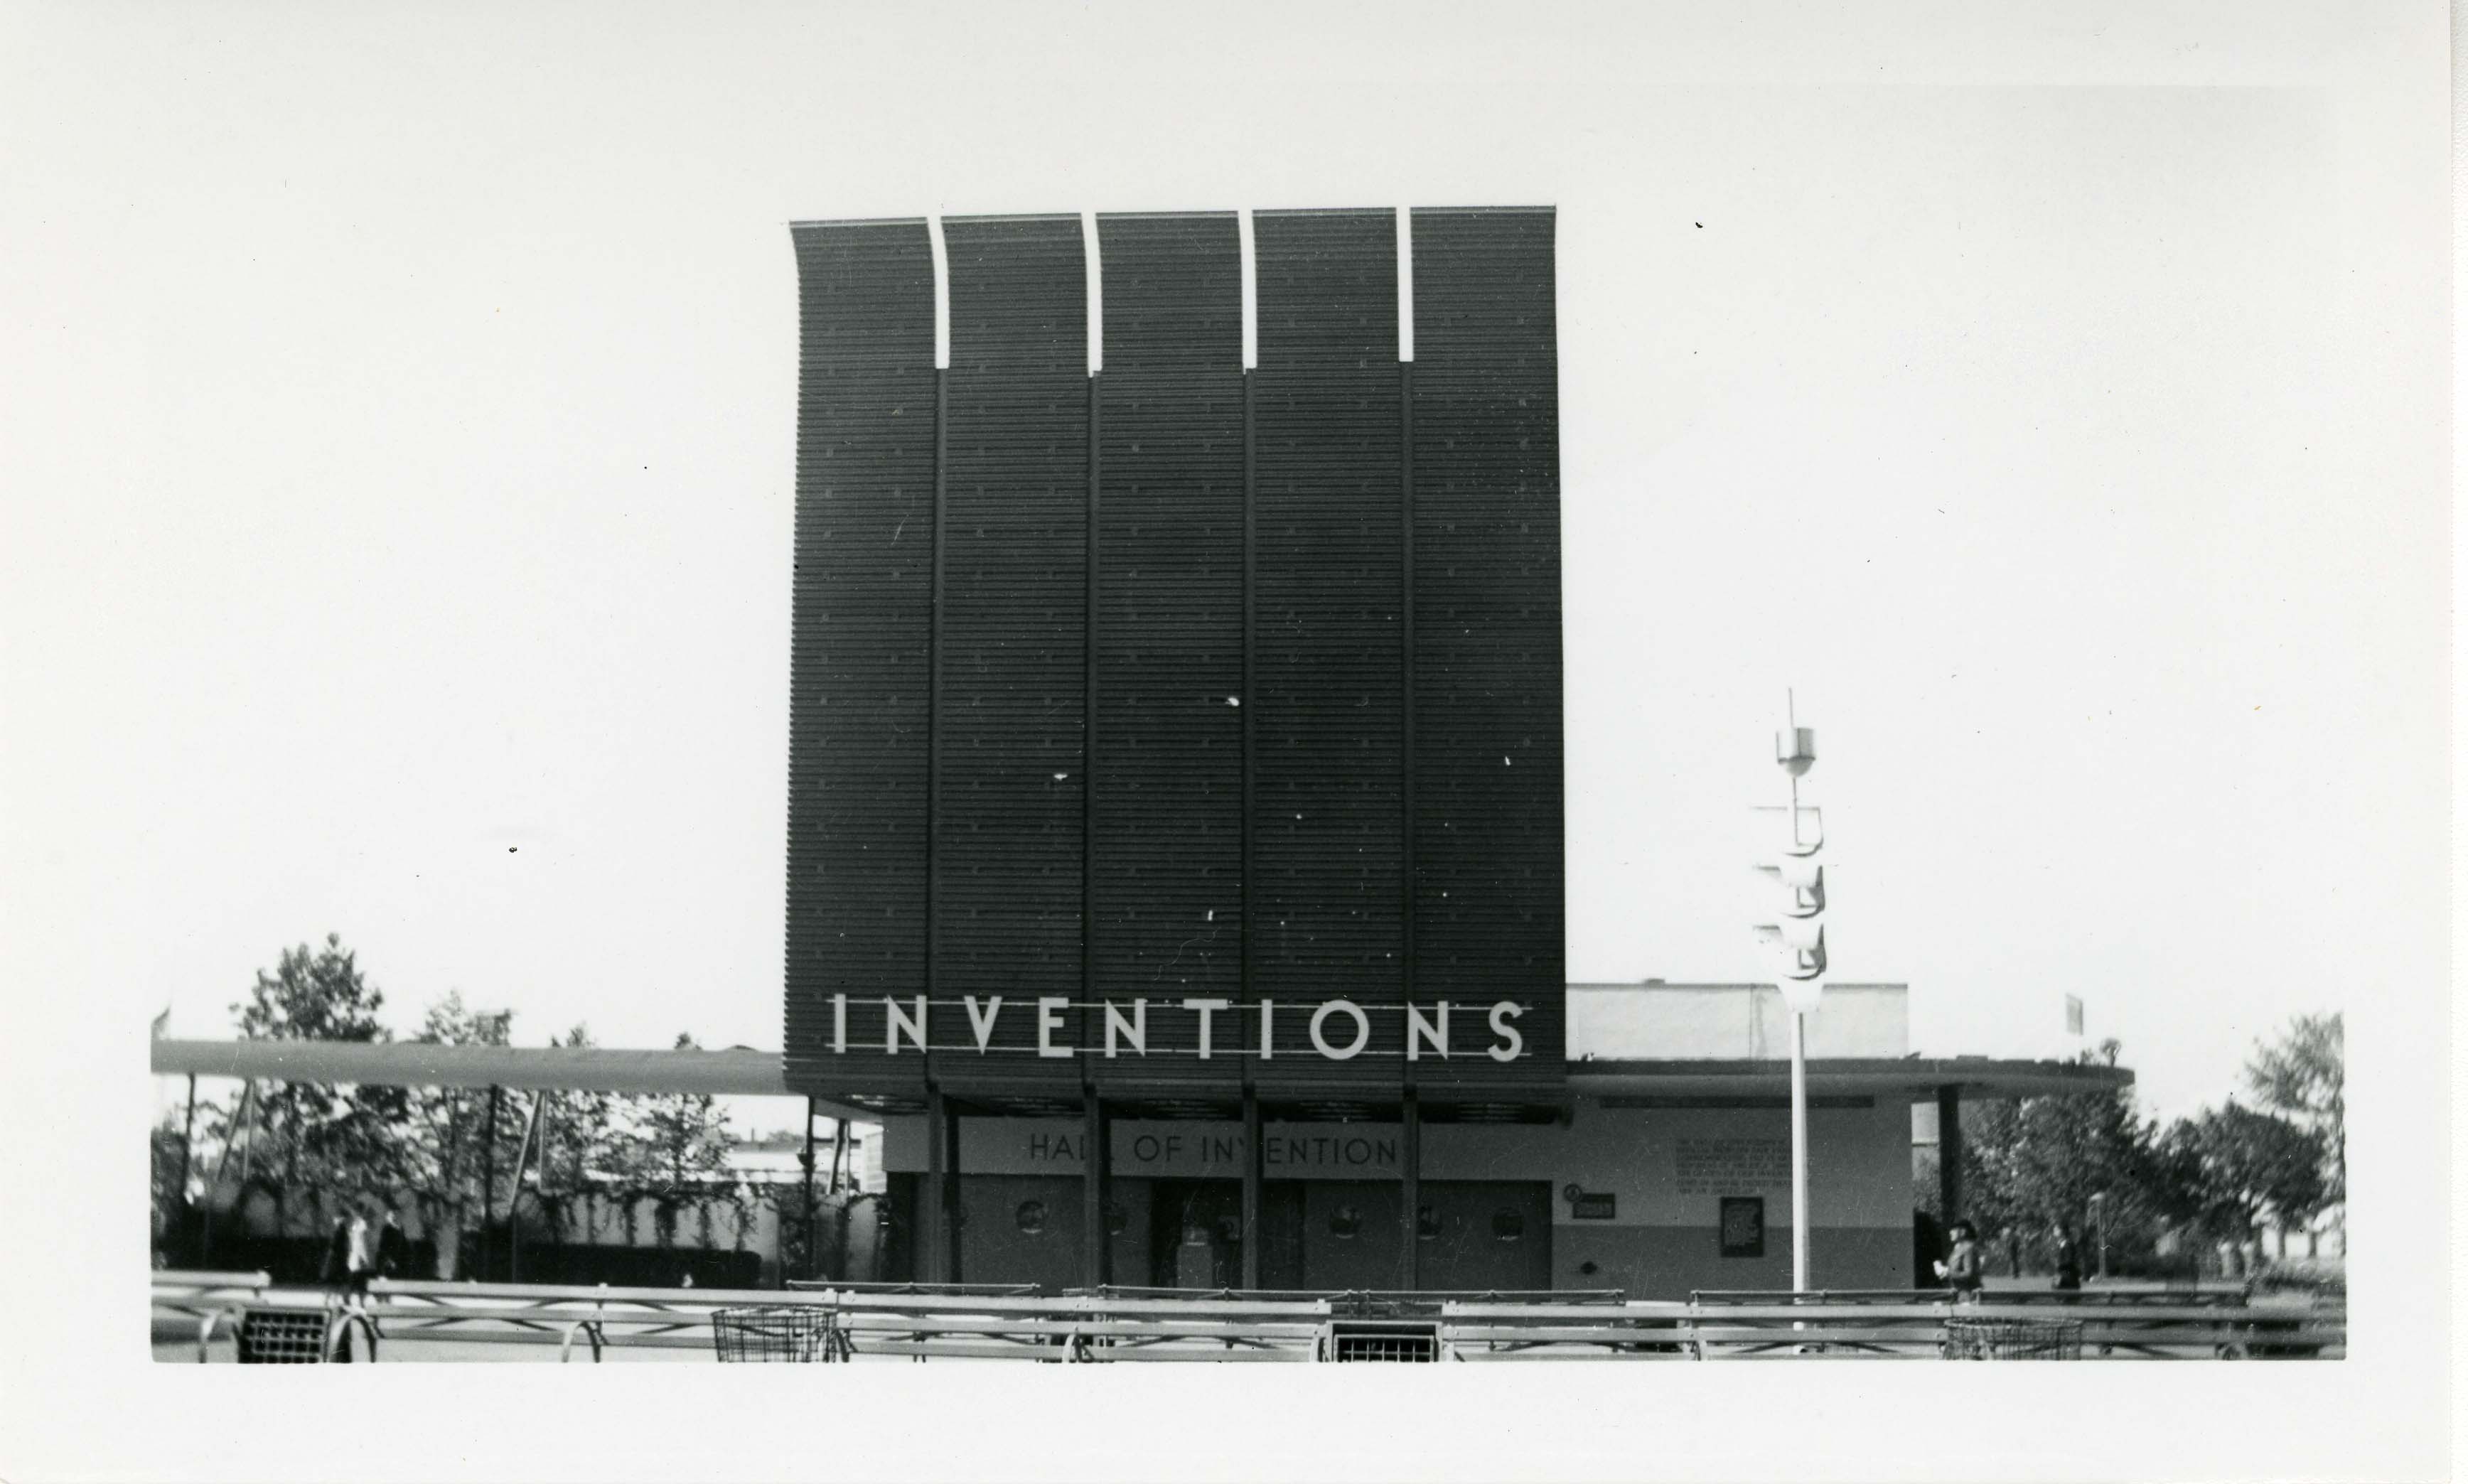 Photograph, Hall of Inventions, New York World’s Fair, 1940 (AC0560-0000049)